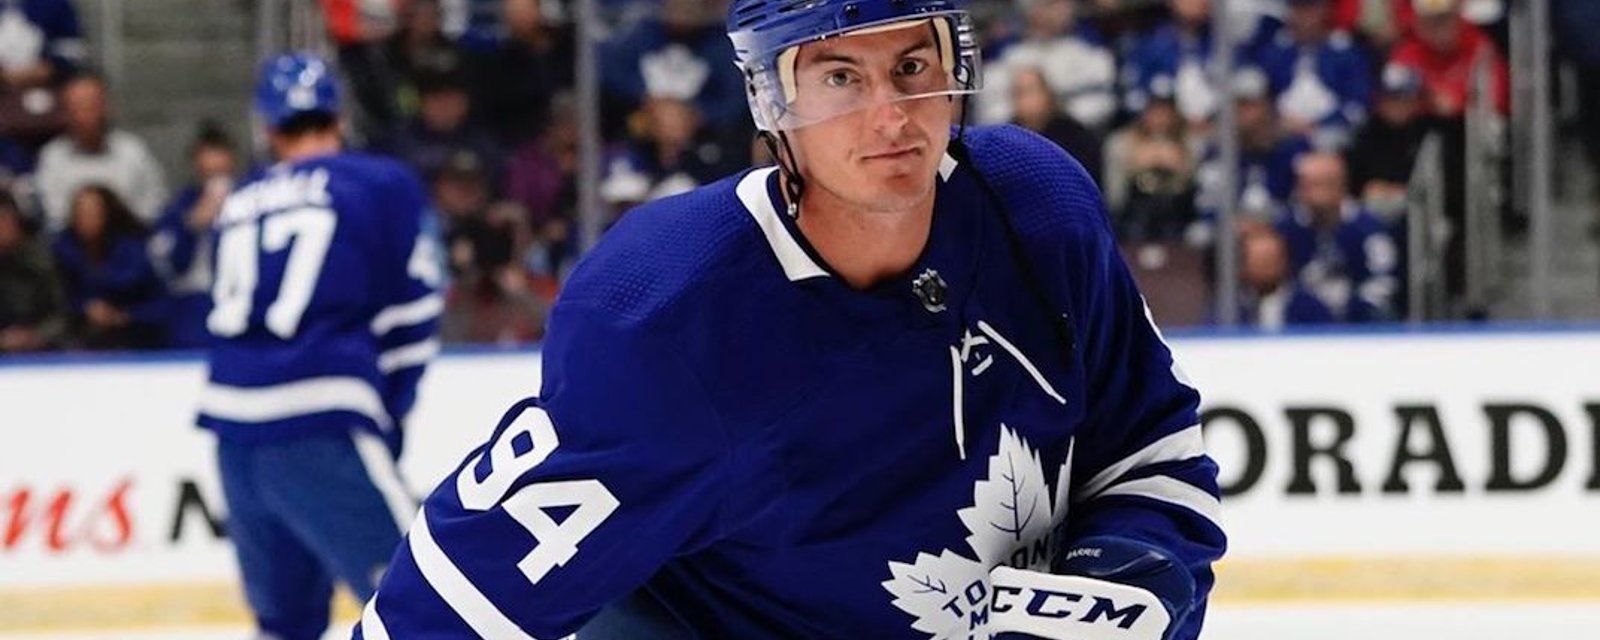 A deal in place for Leafs to trade Barrie!?